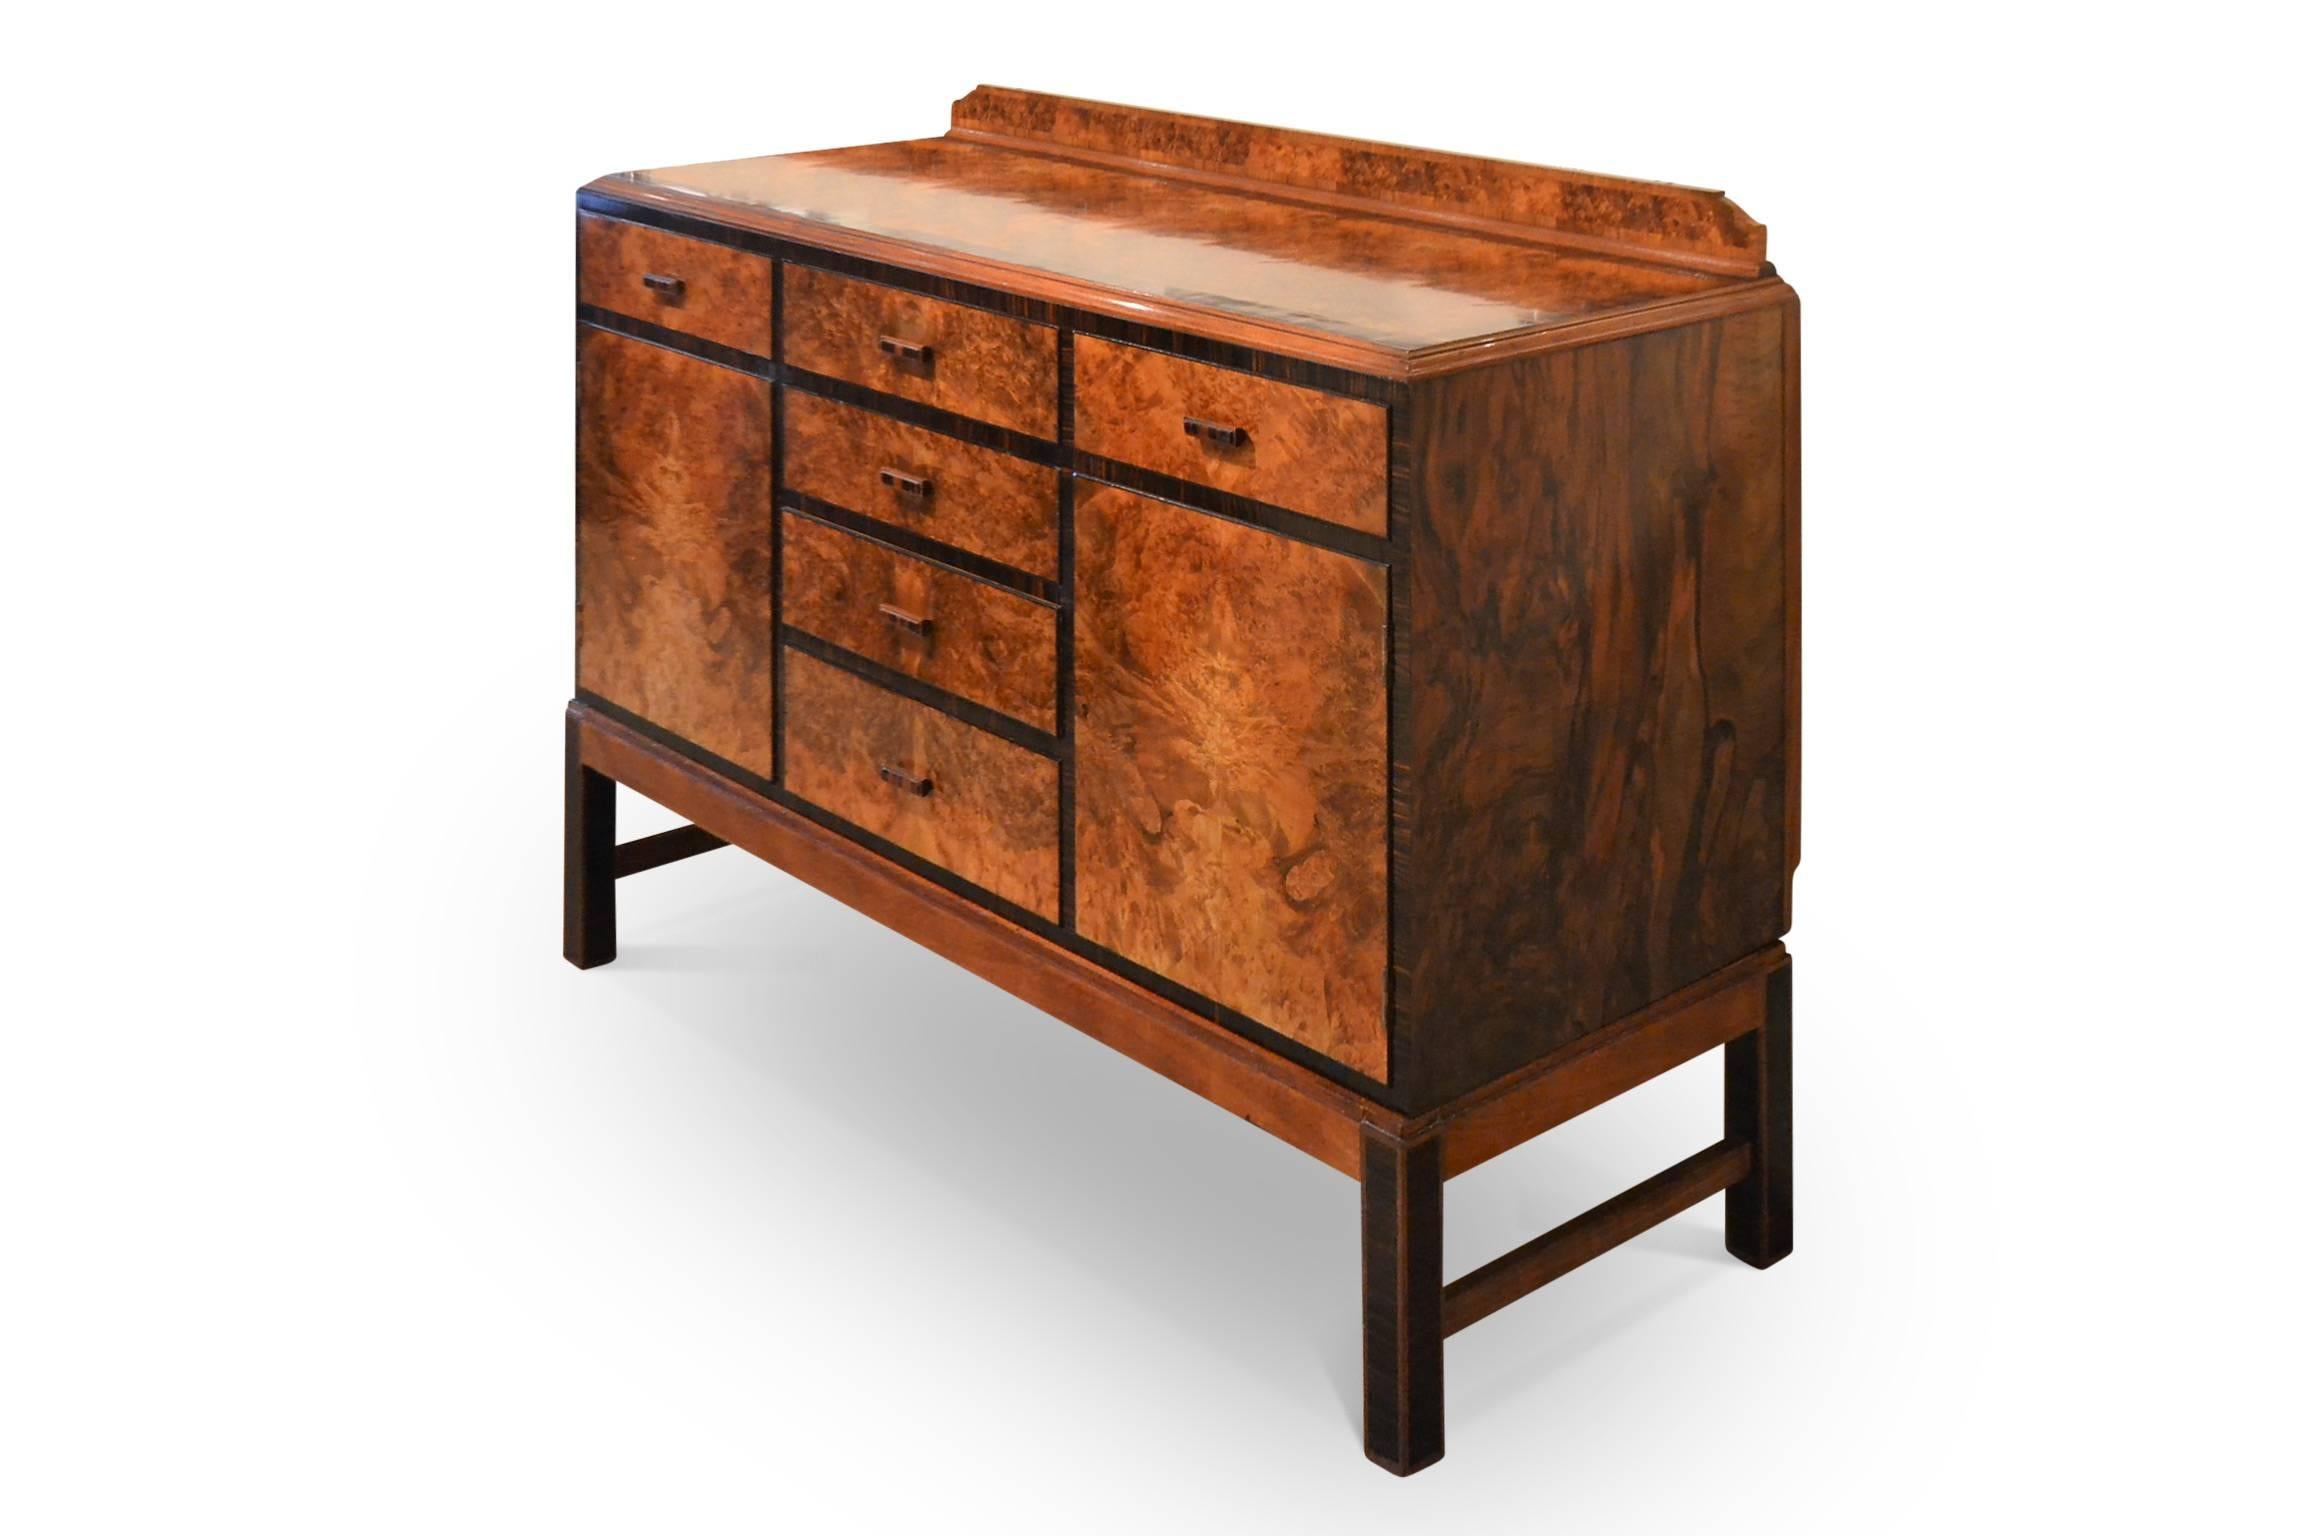 This sideboard in the Art Deco or Modernist style is a fine quality piece of hand-craftsmanship in burr walnut veneers with banding in Macassar ebony. Hand-cut dovetail joints to drawers. Bears label to back: 'A H Holden, Hammersmith School of Arts